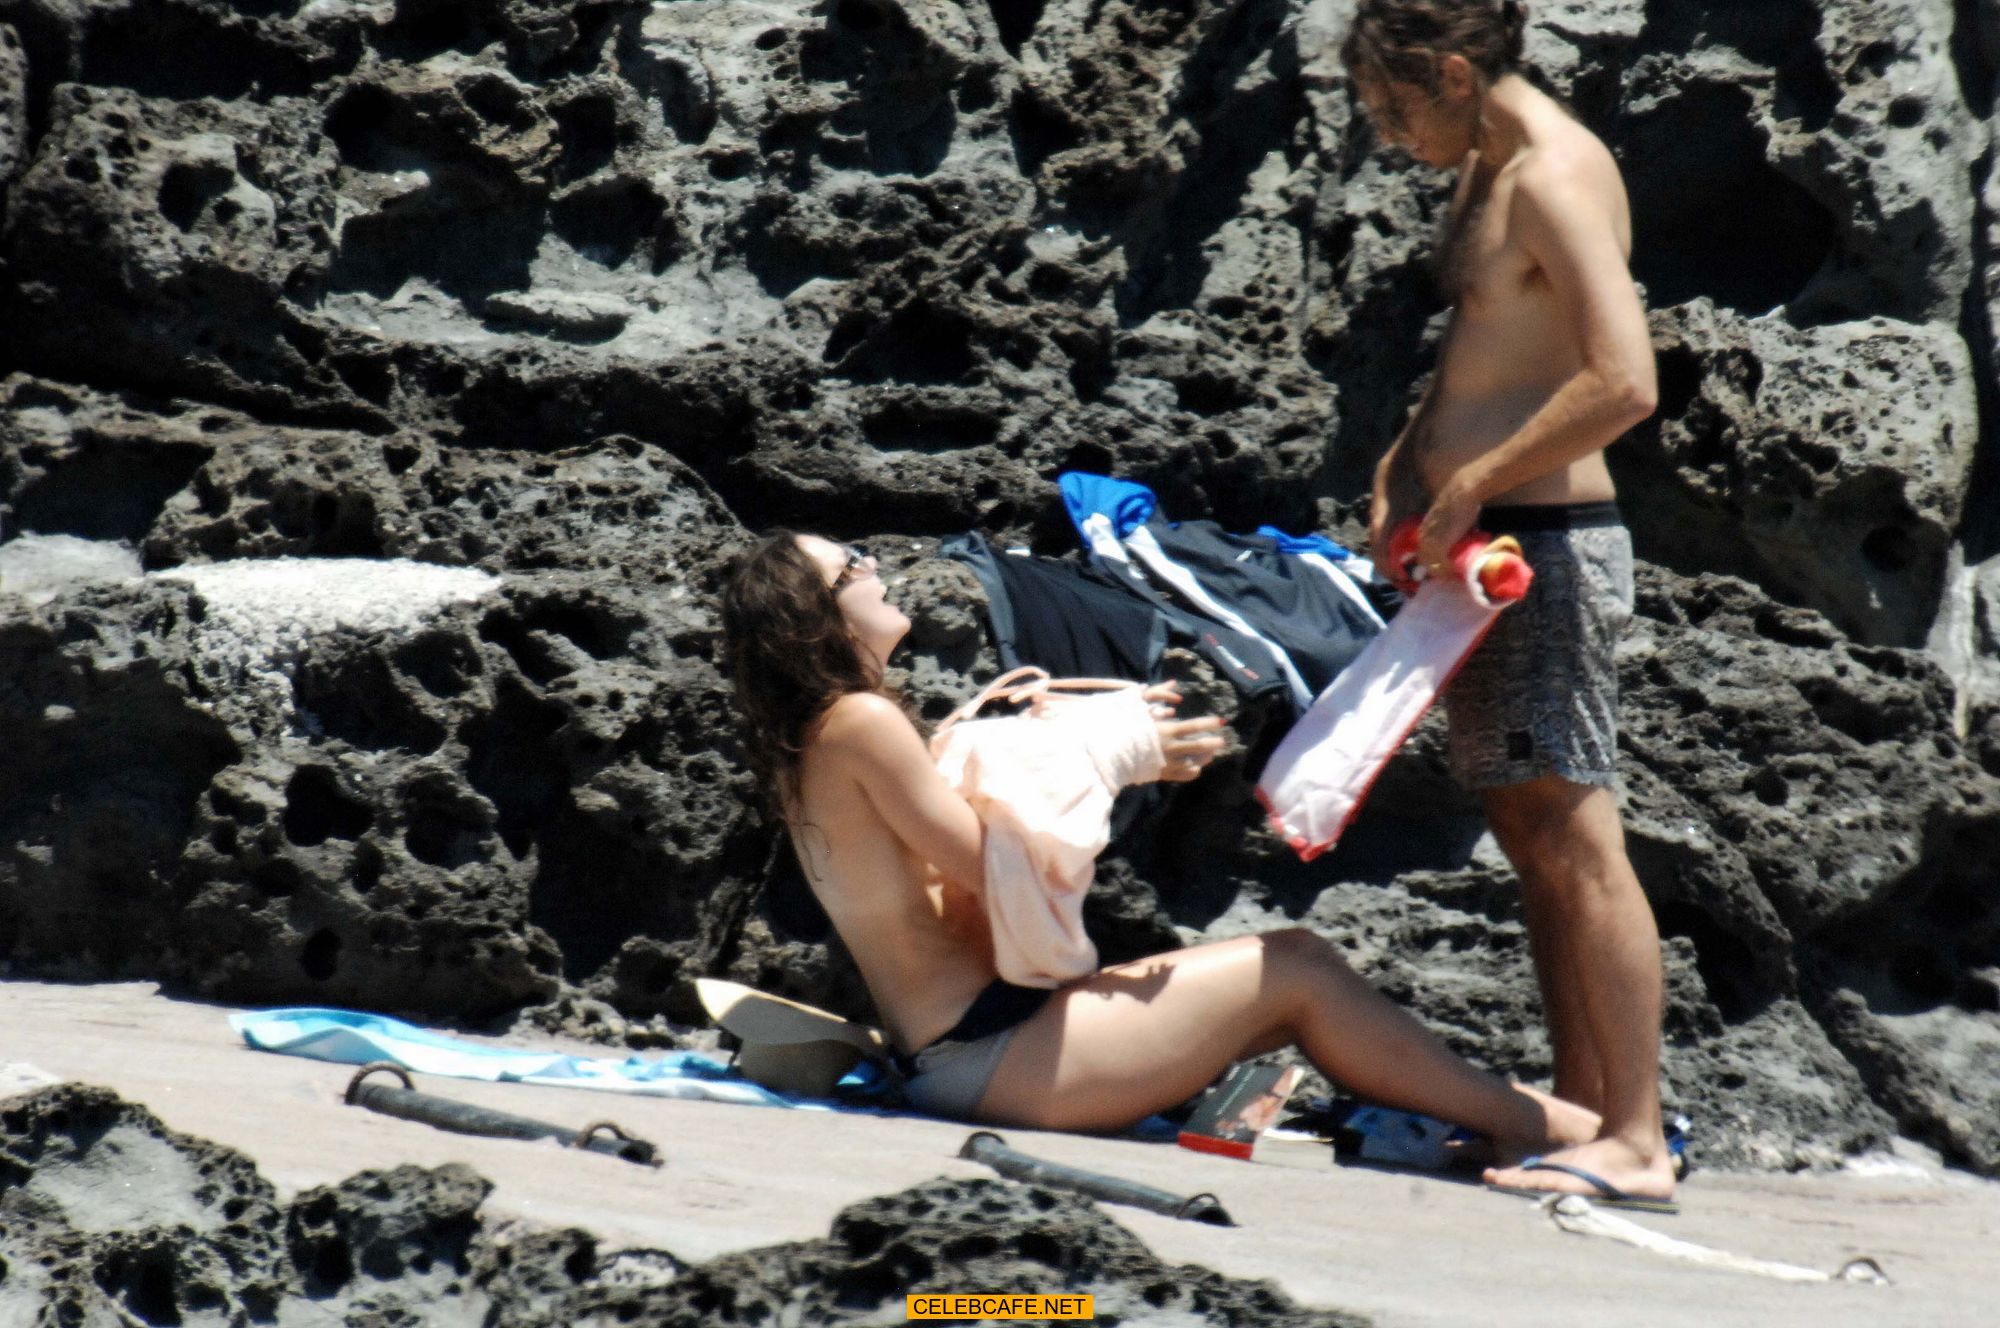 keira_knightley_on_the_beach_in_pantelleria_some_topless_62918_22.jpg